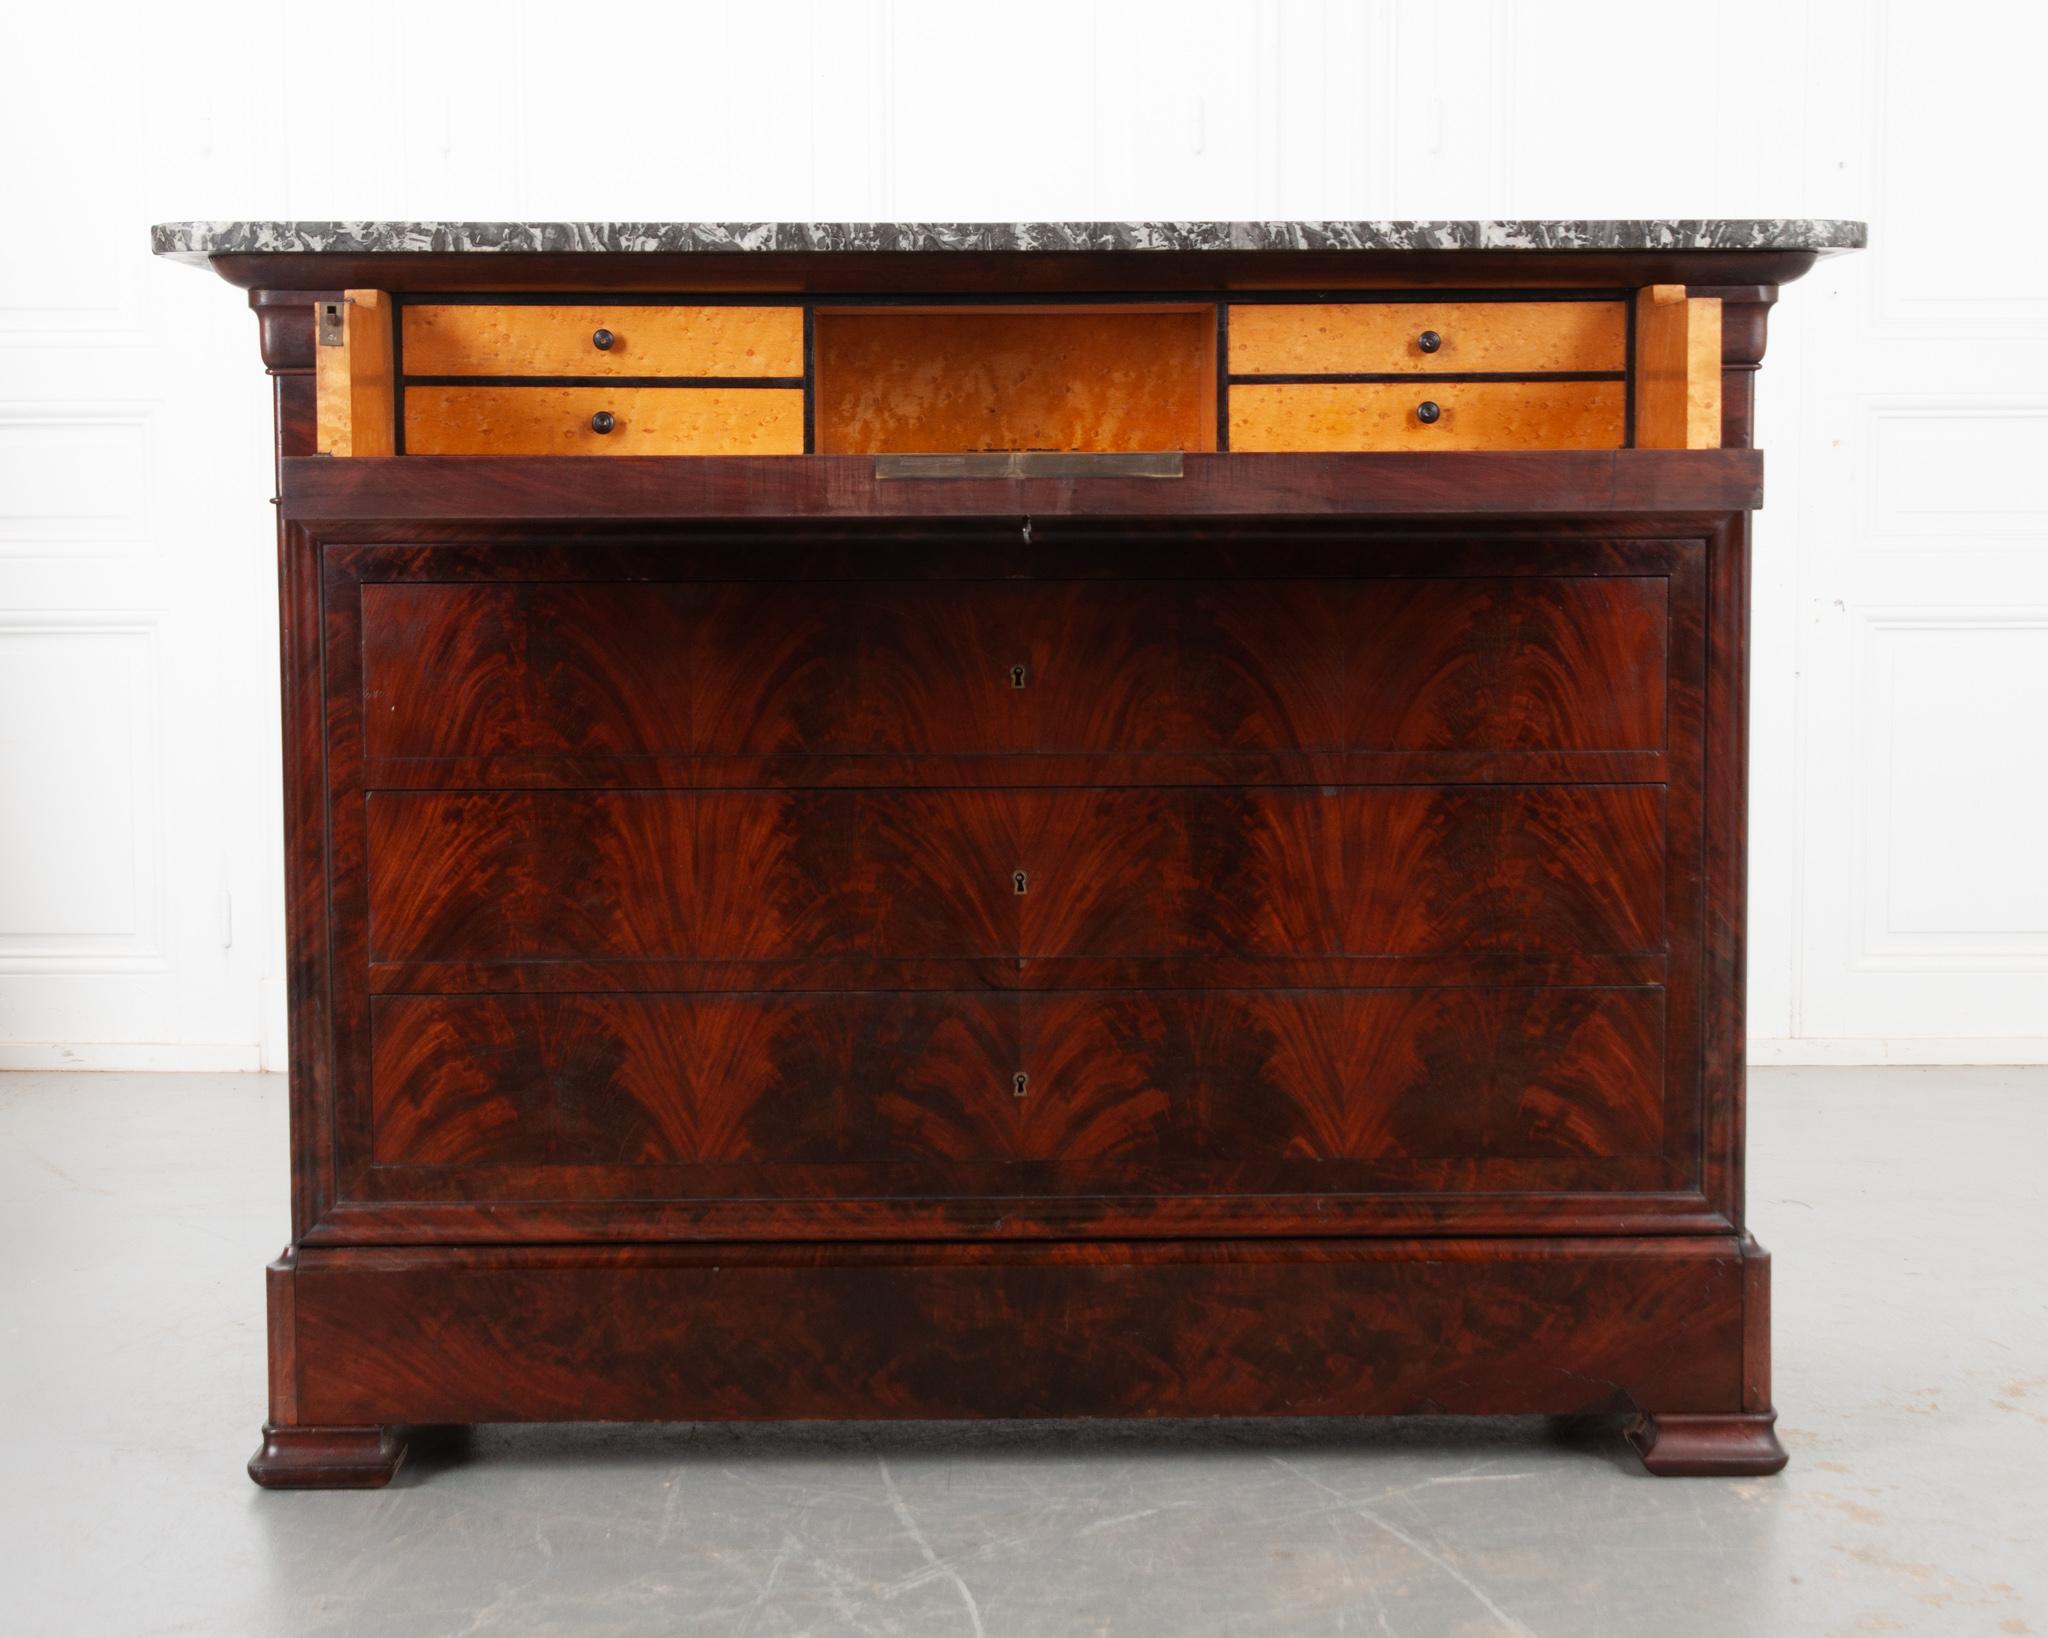 A stunning Louis Philippe style mahogany commode with a fold-down secretary desk housed in its top drawer. Its gray and charcoal marble top has rounded front corners and a fantastic visual texture, complimented by its exceptional mahogany finish.